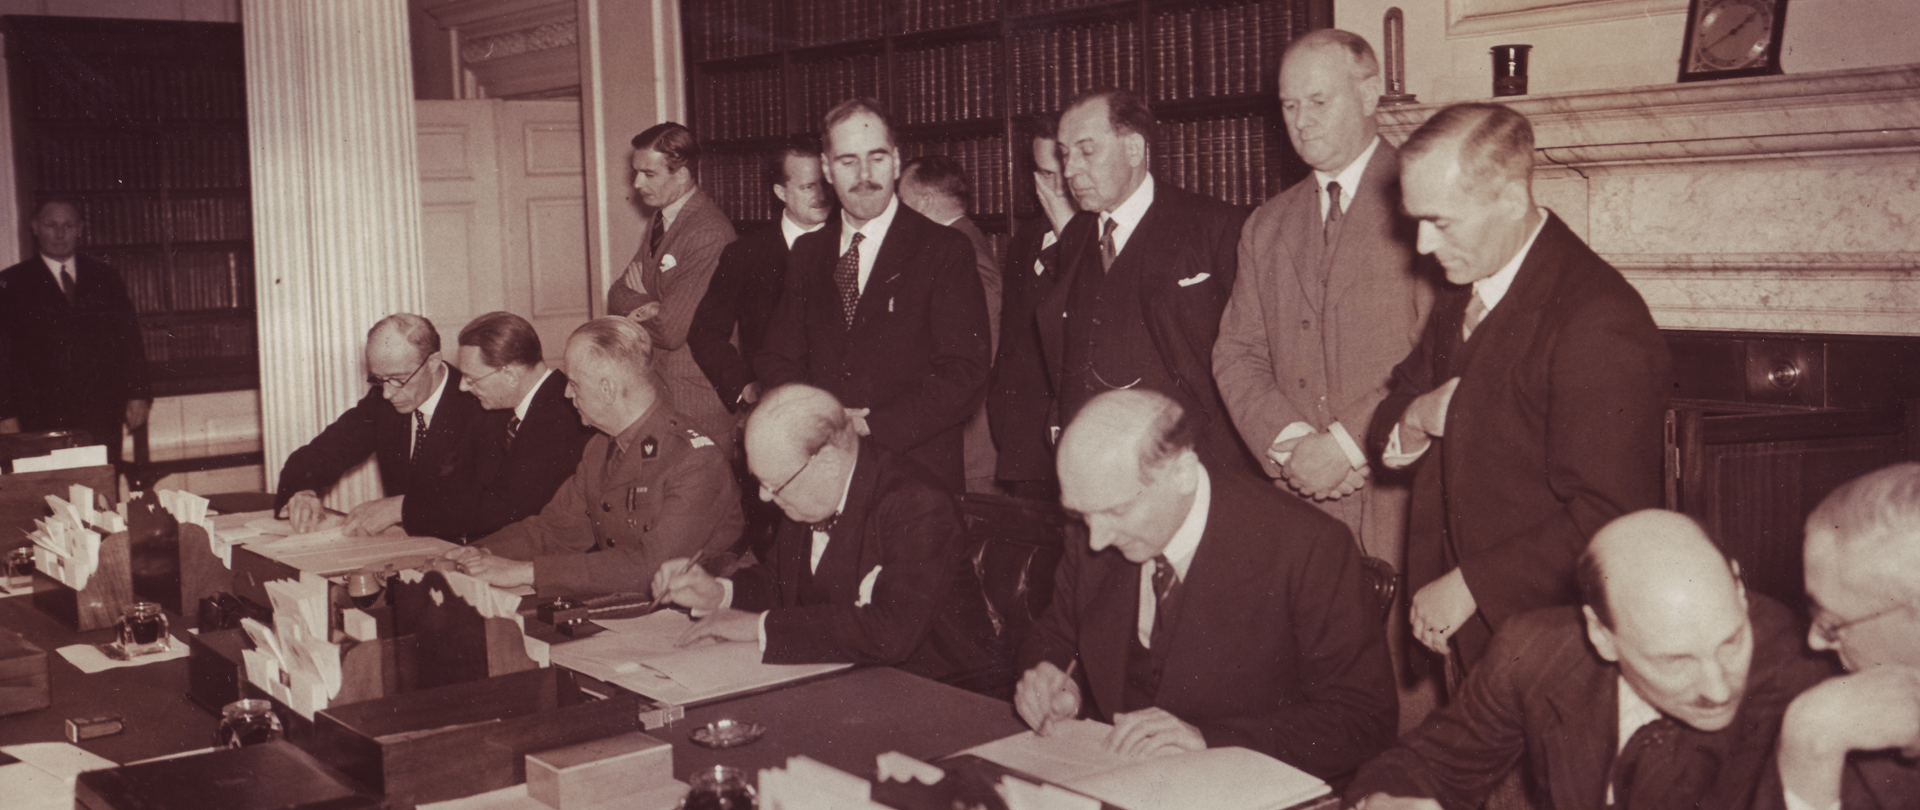 The signing of the Anglo-Polish military alliance. Seated from the left are: Foreign Secretary Lord Halifax, Ambassador Edward Raczyński, Prime Minister General Władysław Sikorski, Prime Minister Winston Churchill, Foreign Minister August Zaleski and members of Britain’s War Cabinet Clement Attlee and Arthur Greenwood. In the background: War Secretary Anthony Eden (standing behind Sikorski) and Home Secretary John Anderson (standing behind Churchill). Secretary for Dominion Affairs Thomas Inskip stands behind FM Zaleski.